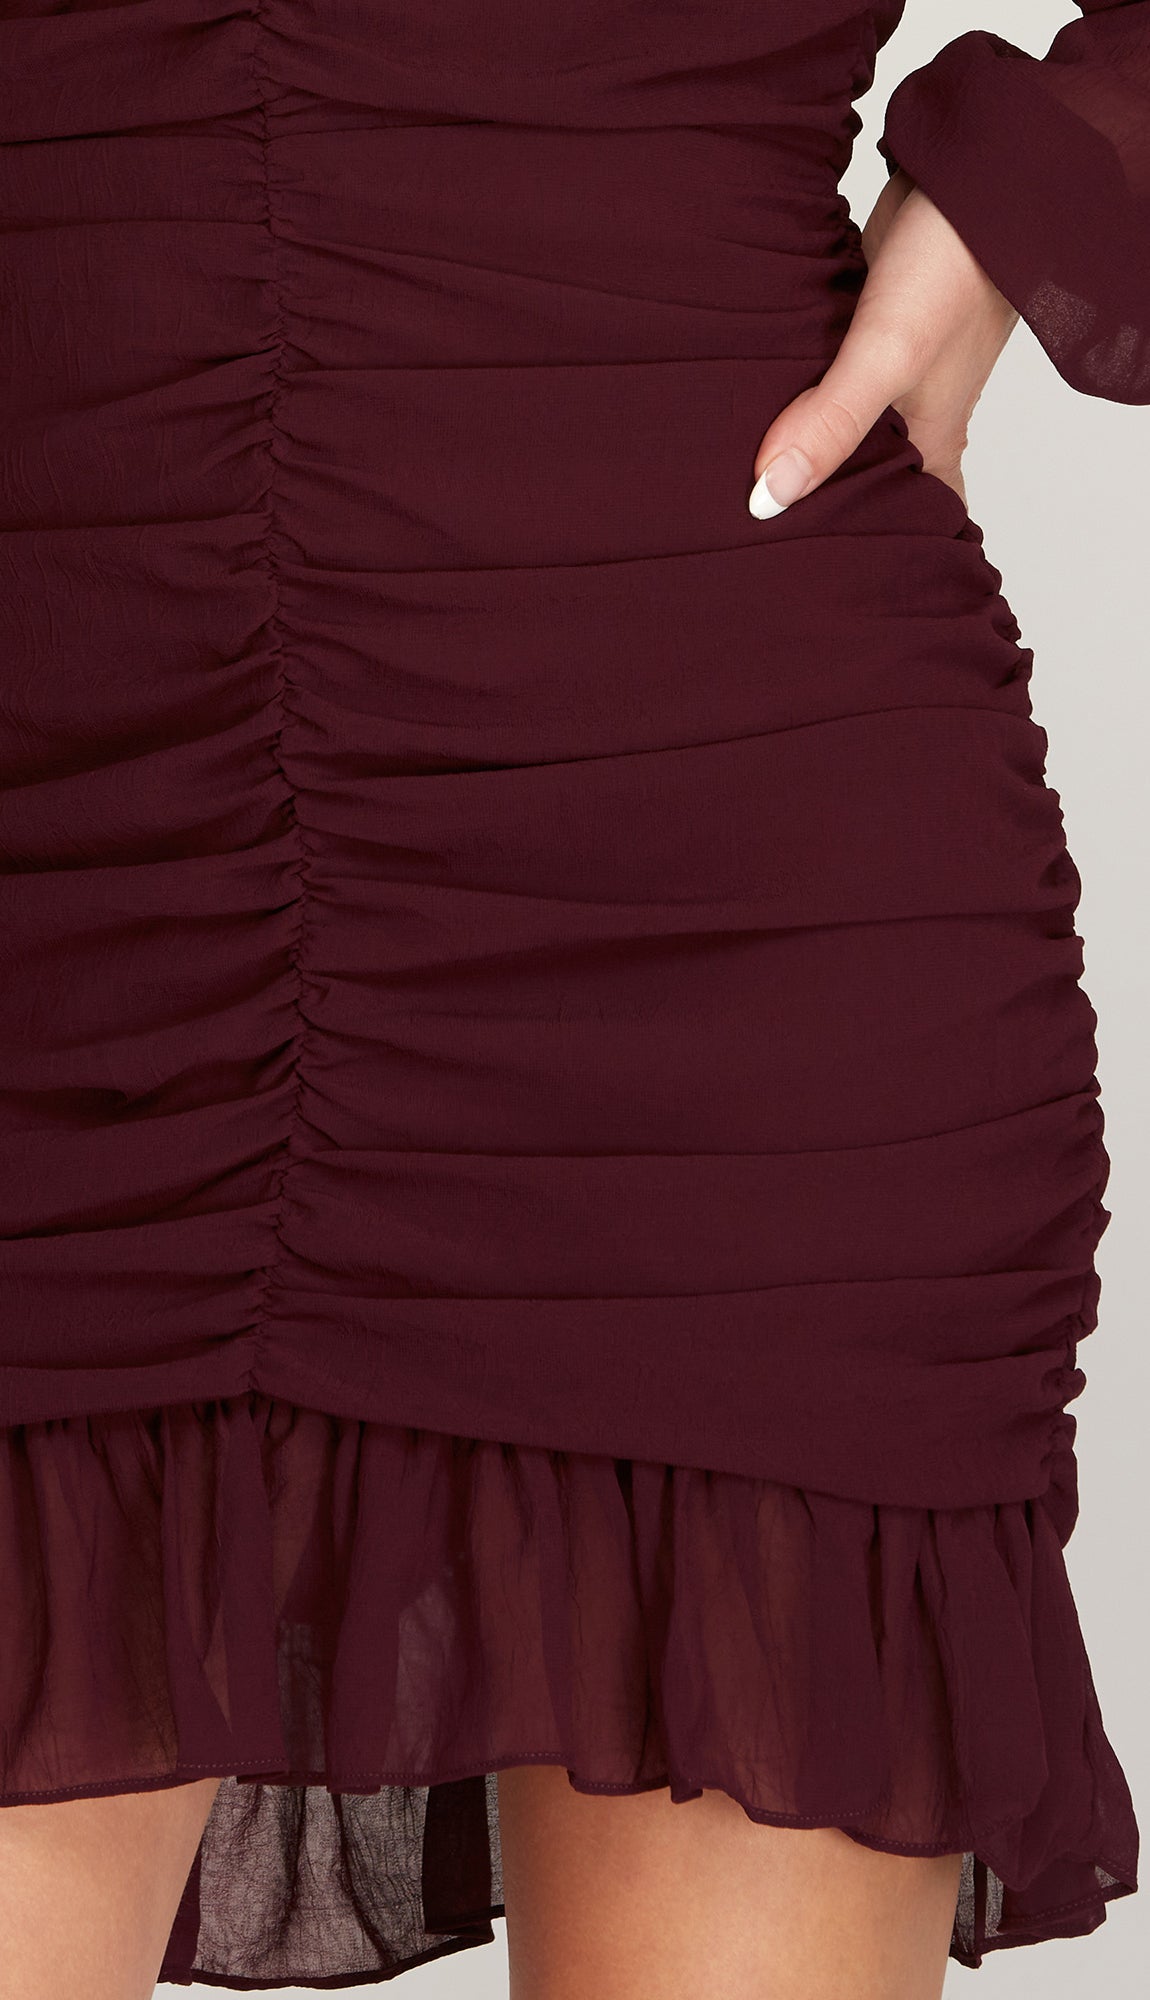 Cranberry Portage Rouched Dress- Wine